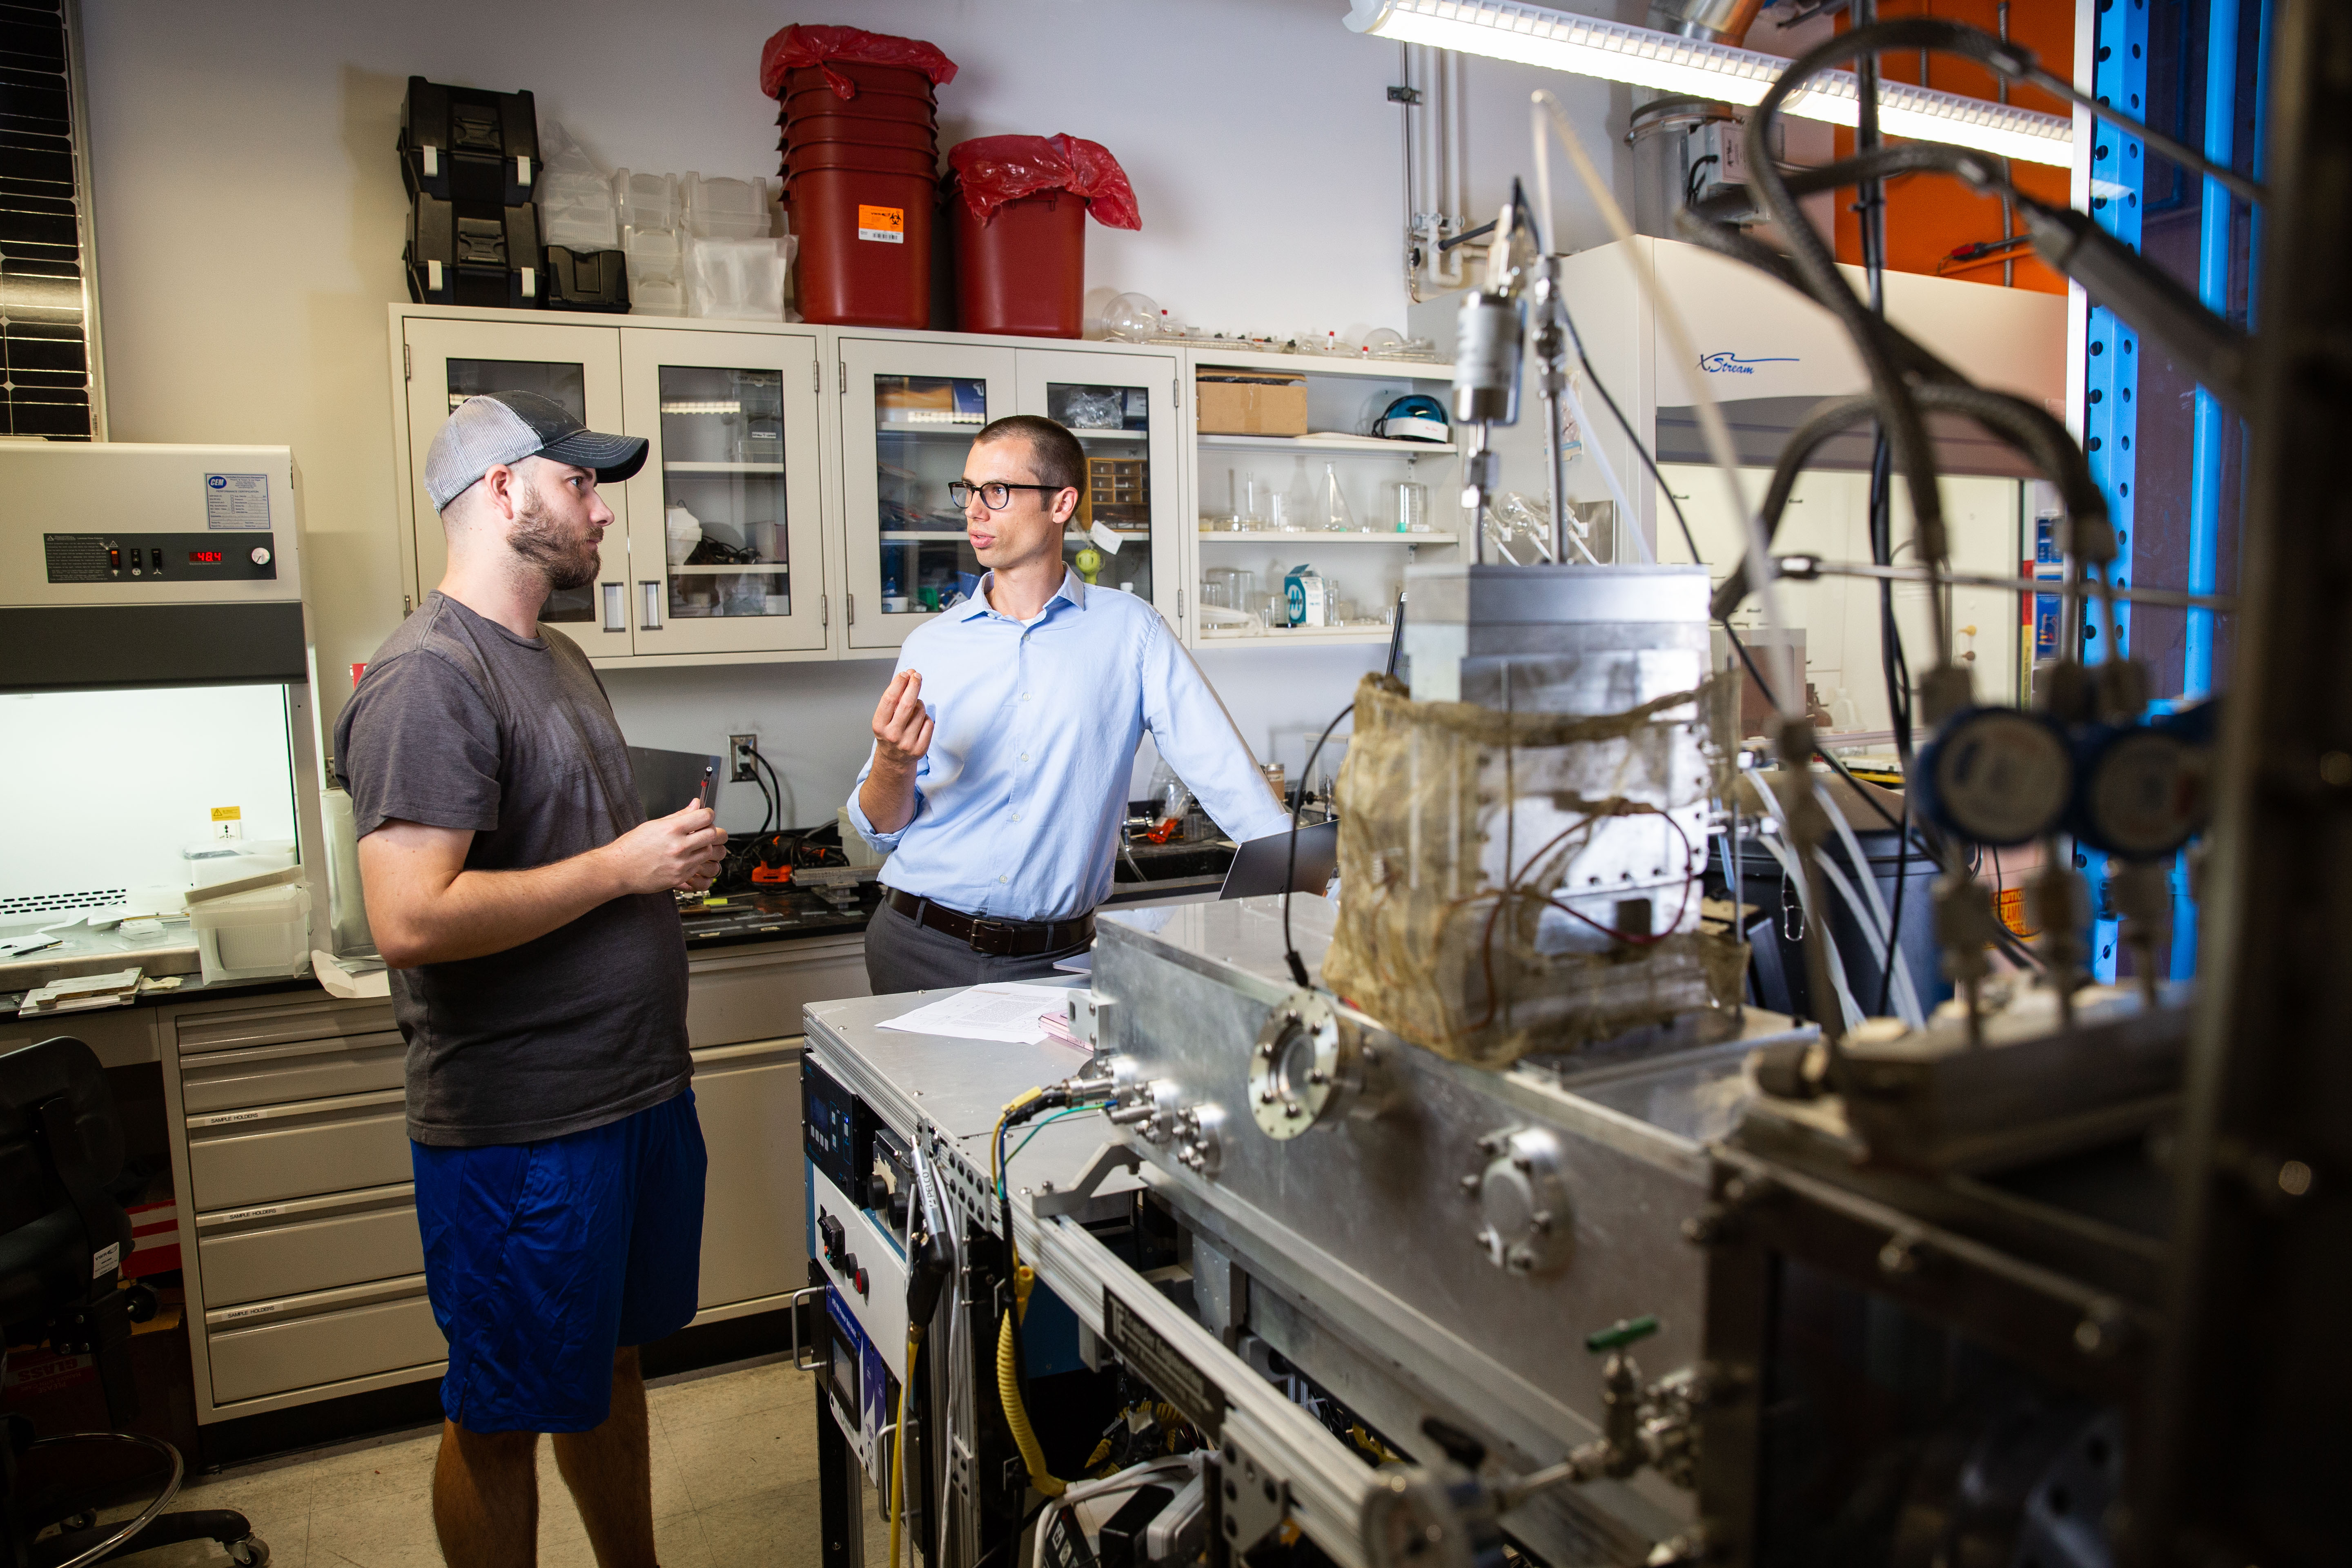 Arizona State University Assistant Professor, Zachary Holman (right), talks with Doctoral Student, Peter Firth, next to a prototype of a nano-particle deposition tool. Holman was awarded a Moore Inventor Fellowship to further develop a technique that can add beneficial properties to ordinary surfaces through nano-particle coatings. Photographer: Deanna Dent/ASU